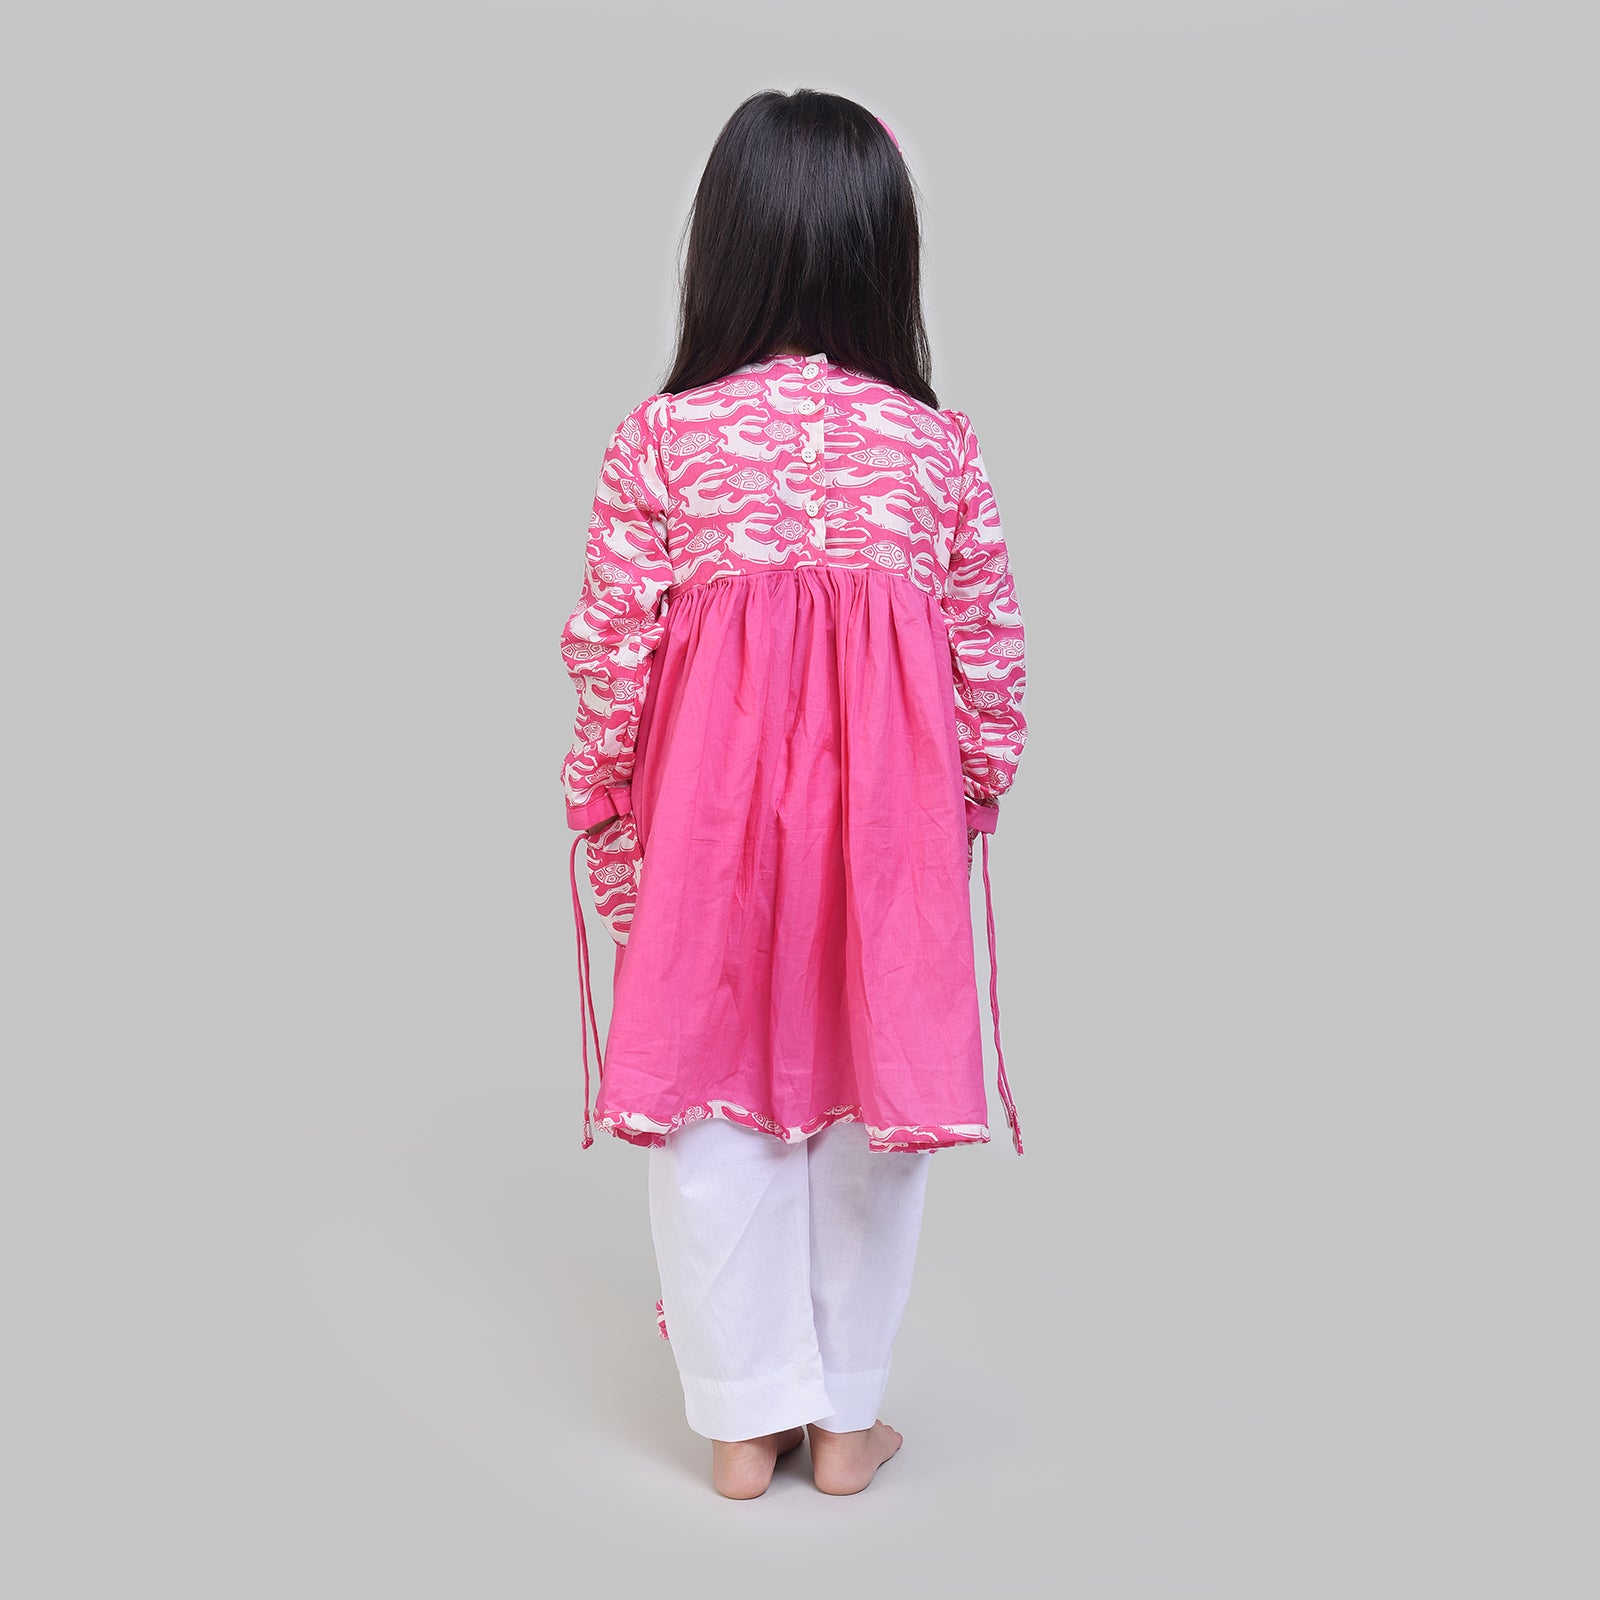 Cotton Full Sleeve Round Neck Kurta with Side Pockets And White Pants For Girls with The Hare & The Tortoise Print